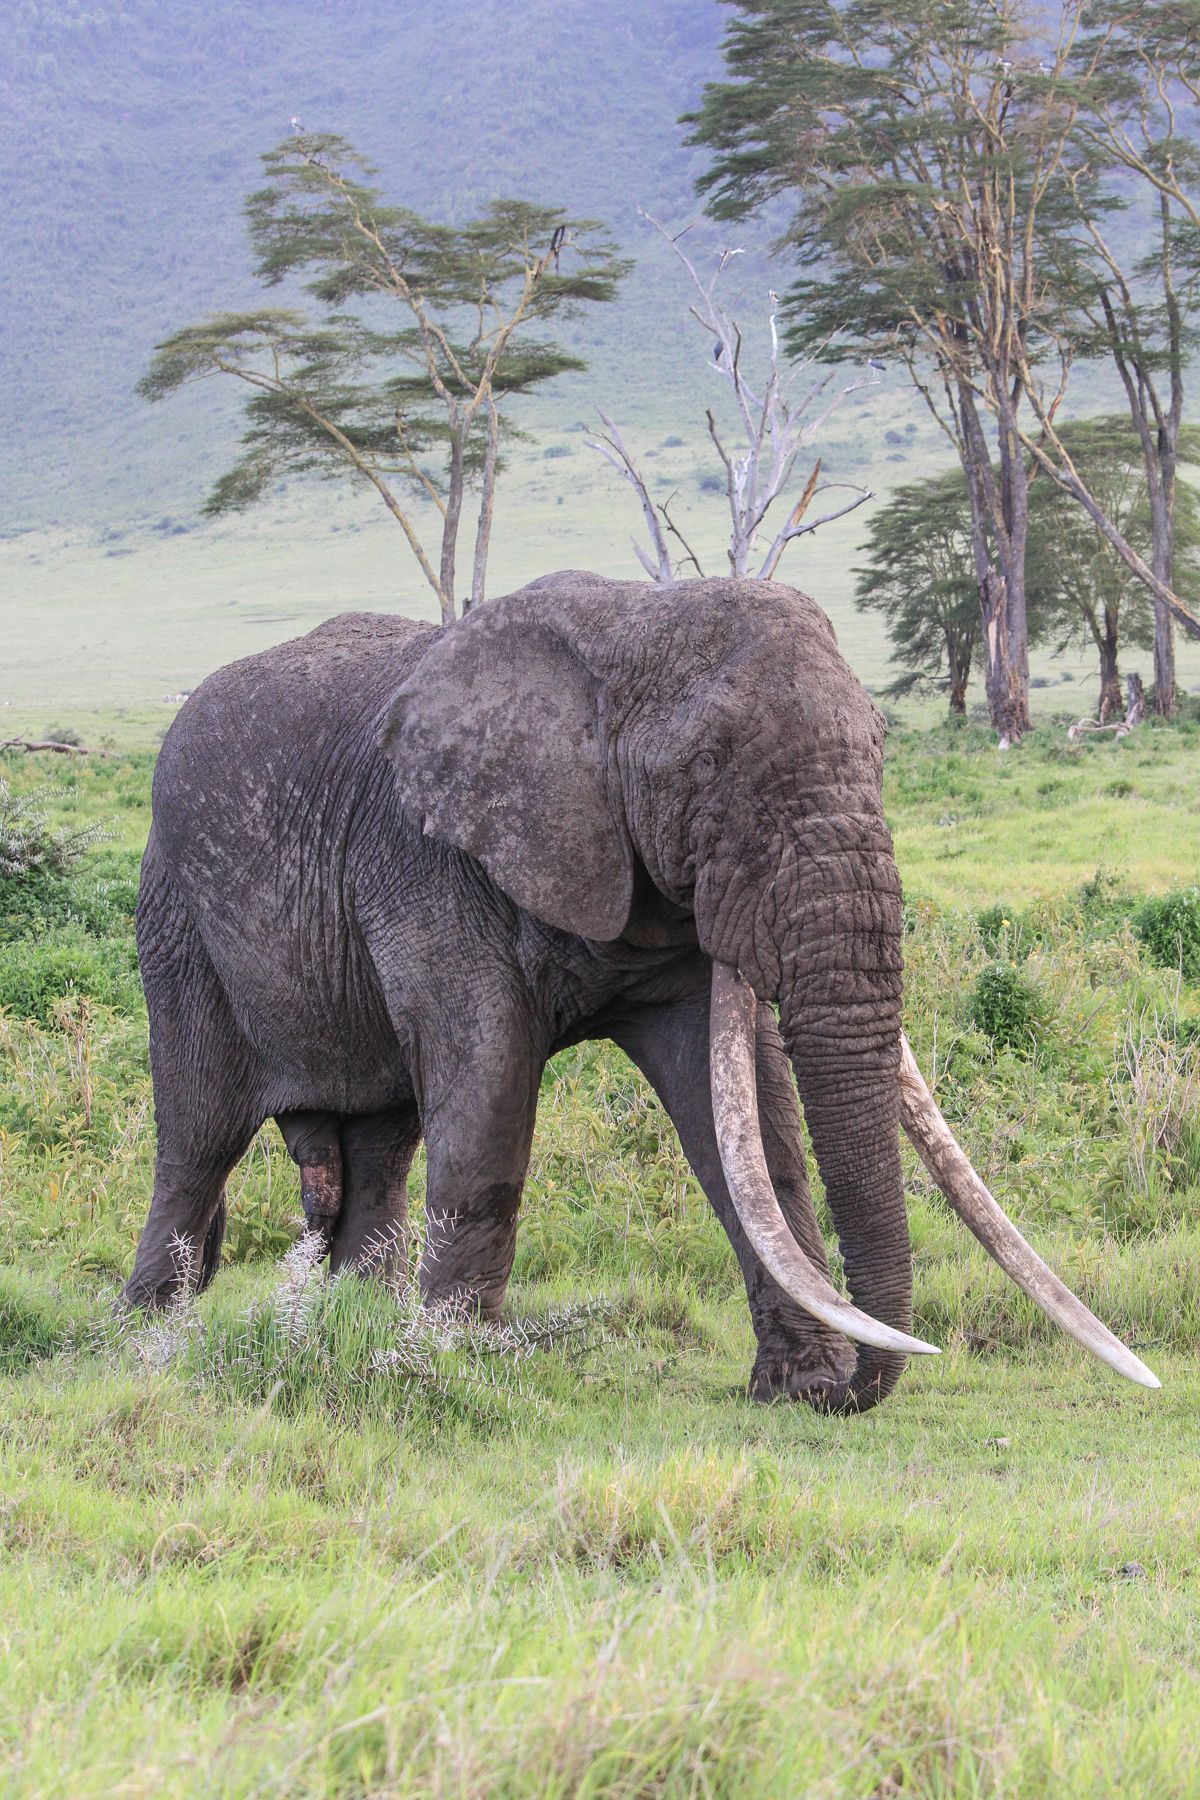 Poaching is nigh on impossible in the crater, so it still has some of the largest tuskers left in Tanzania and indeed in Africa